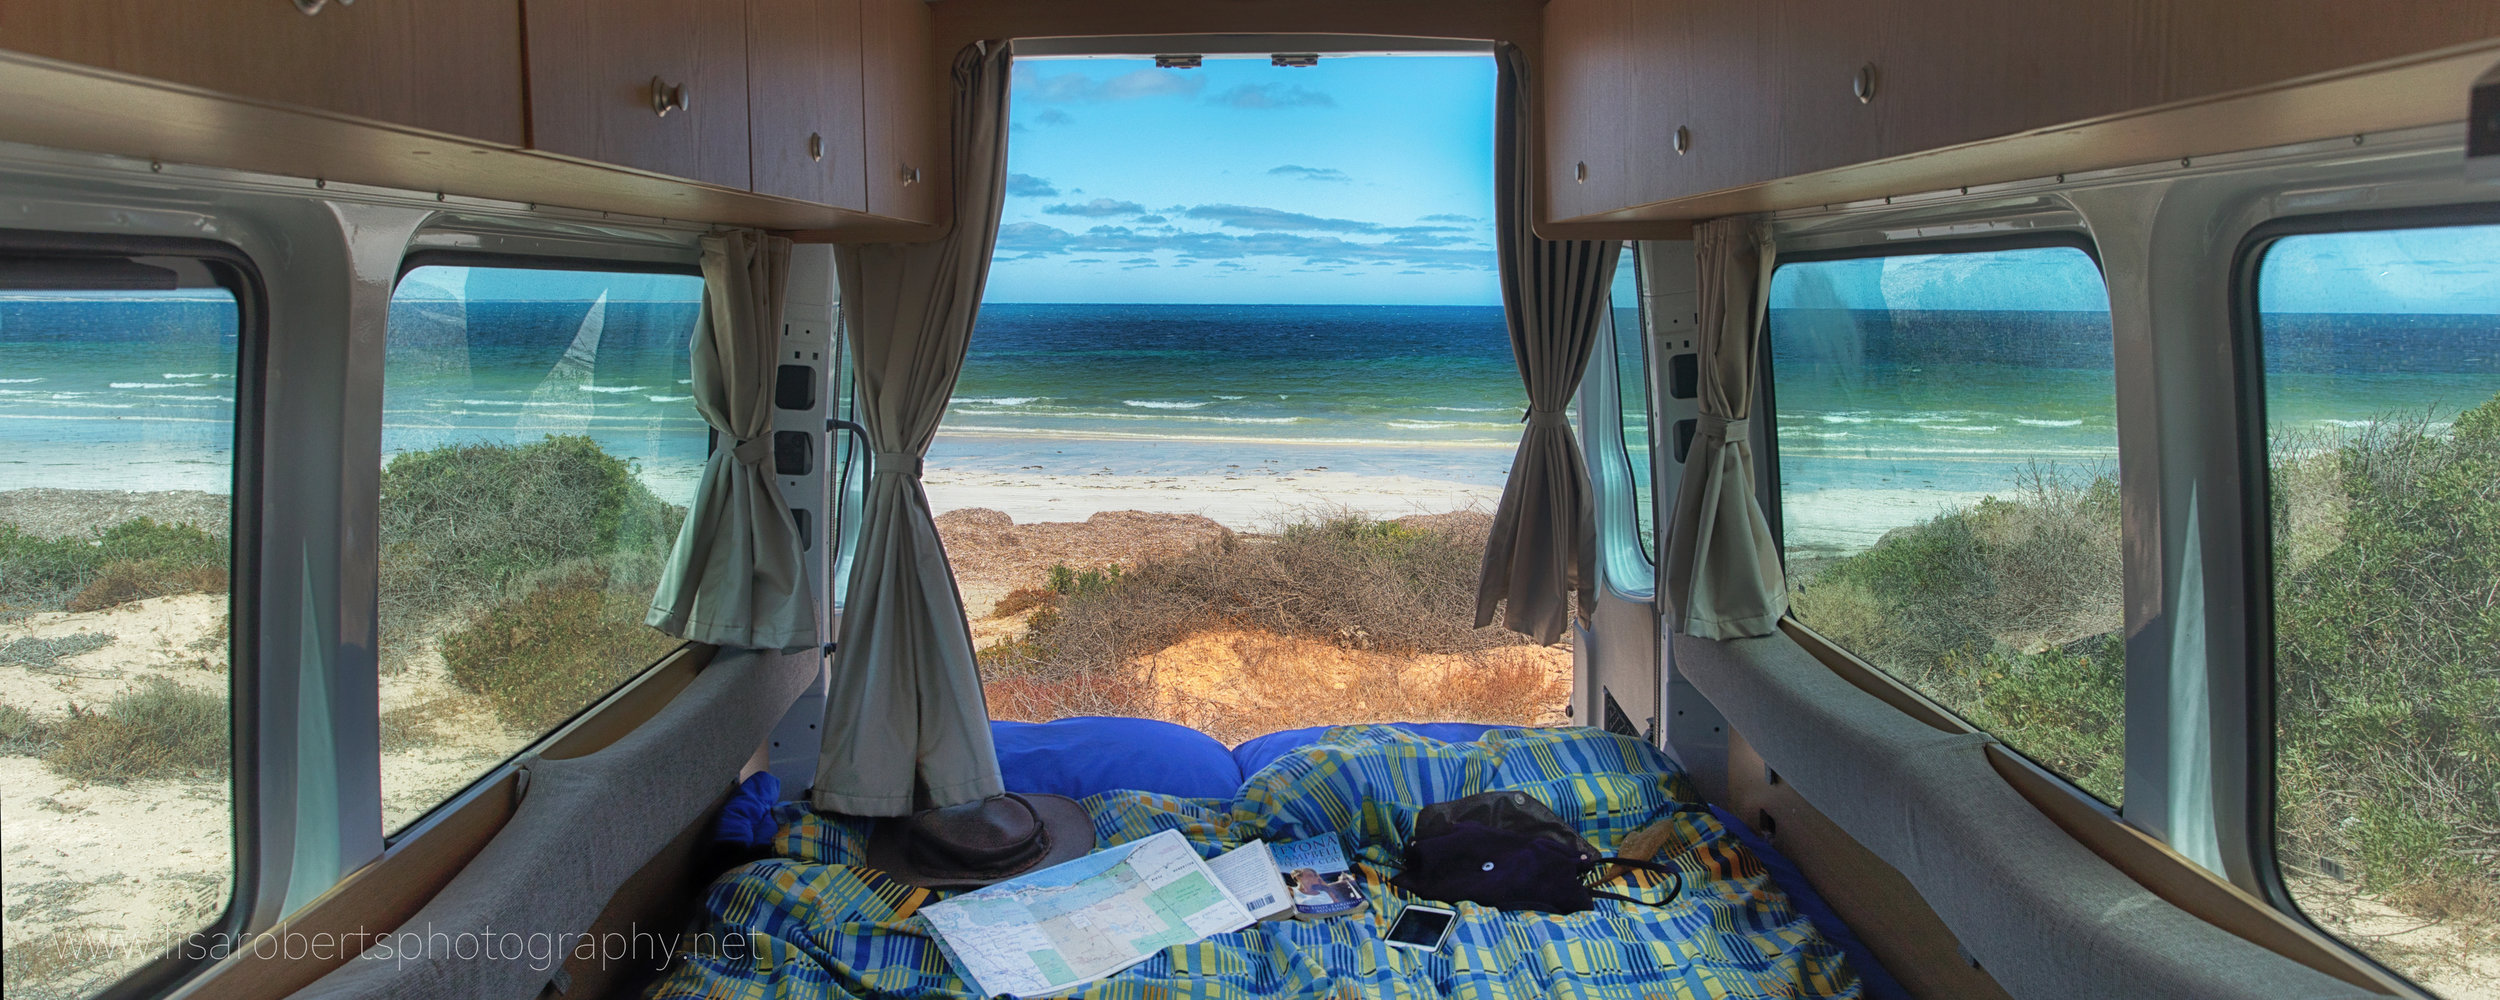  A room with a view, Fowlers Bay, South Australia 